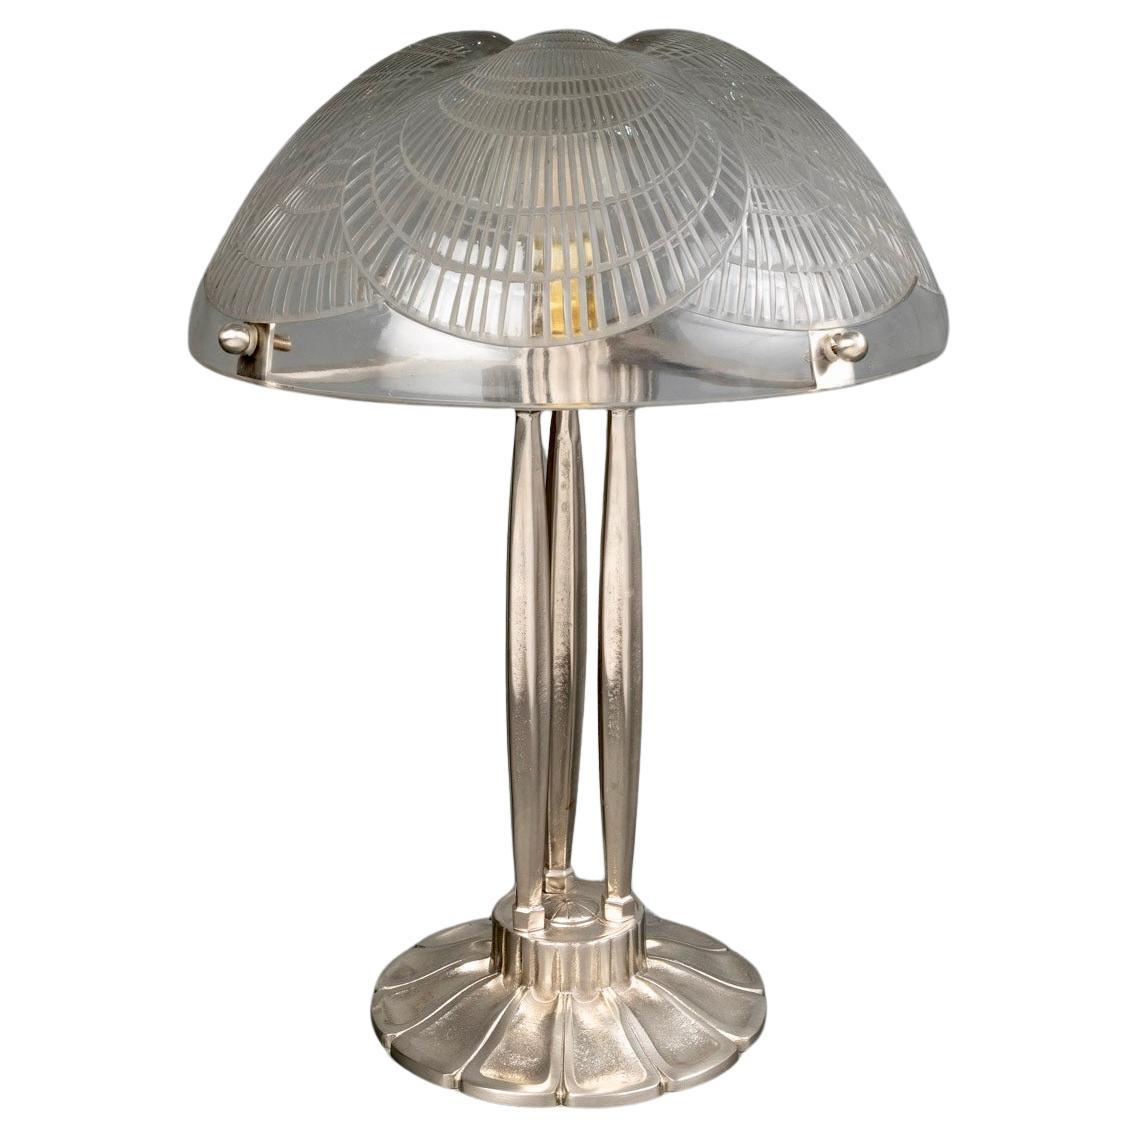 1924 René Lalique - Lamp Coquilles Shells Glass & Nickeled Bronze For Sale